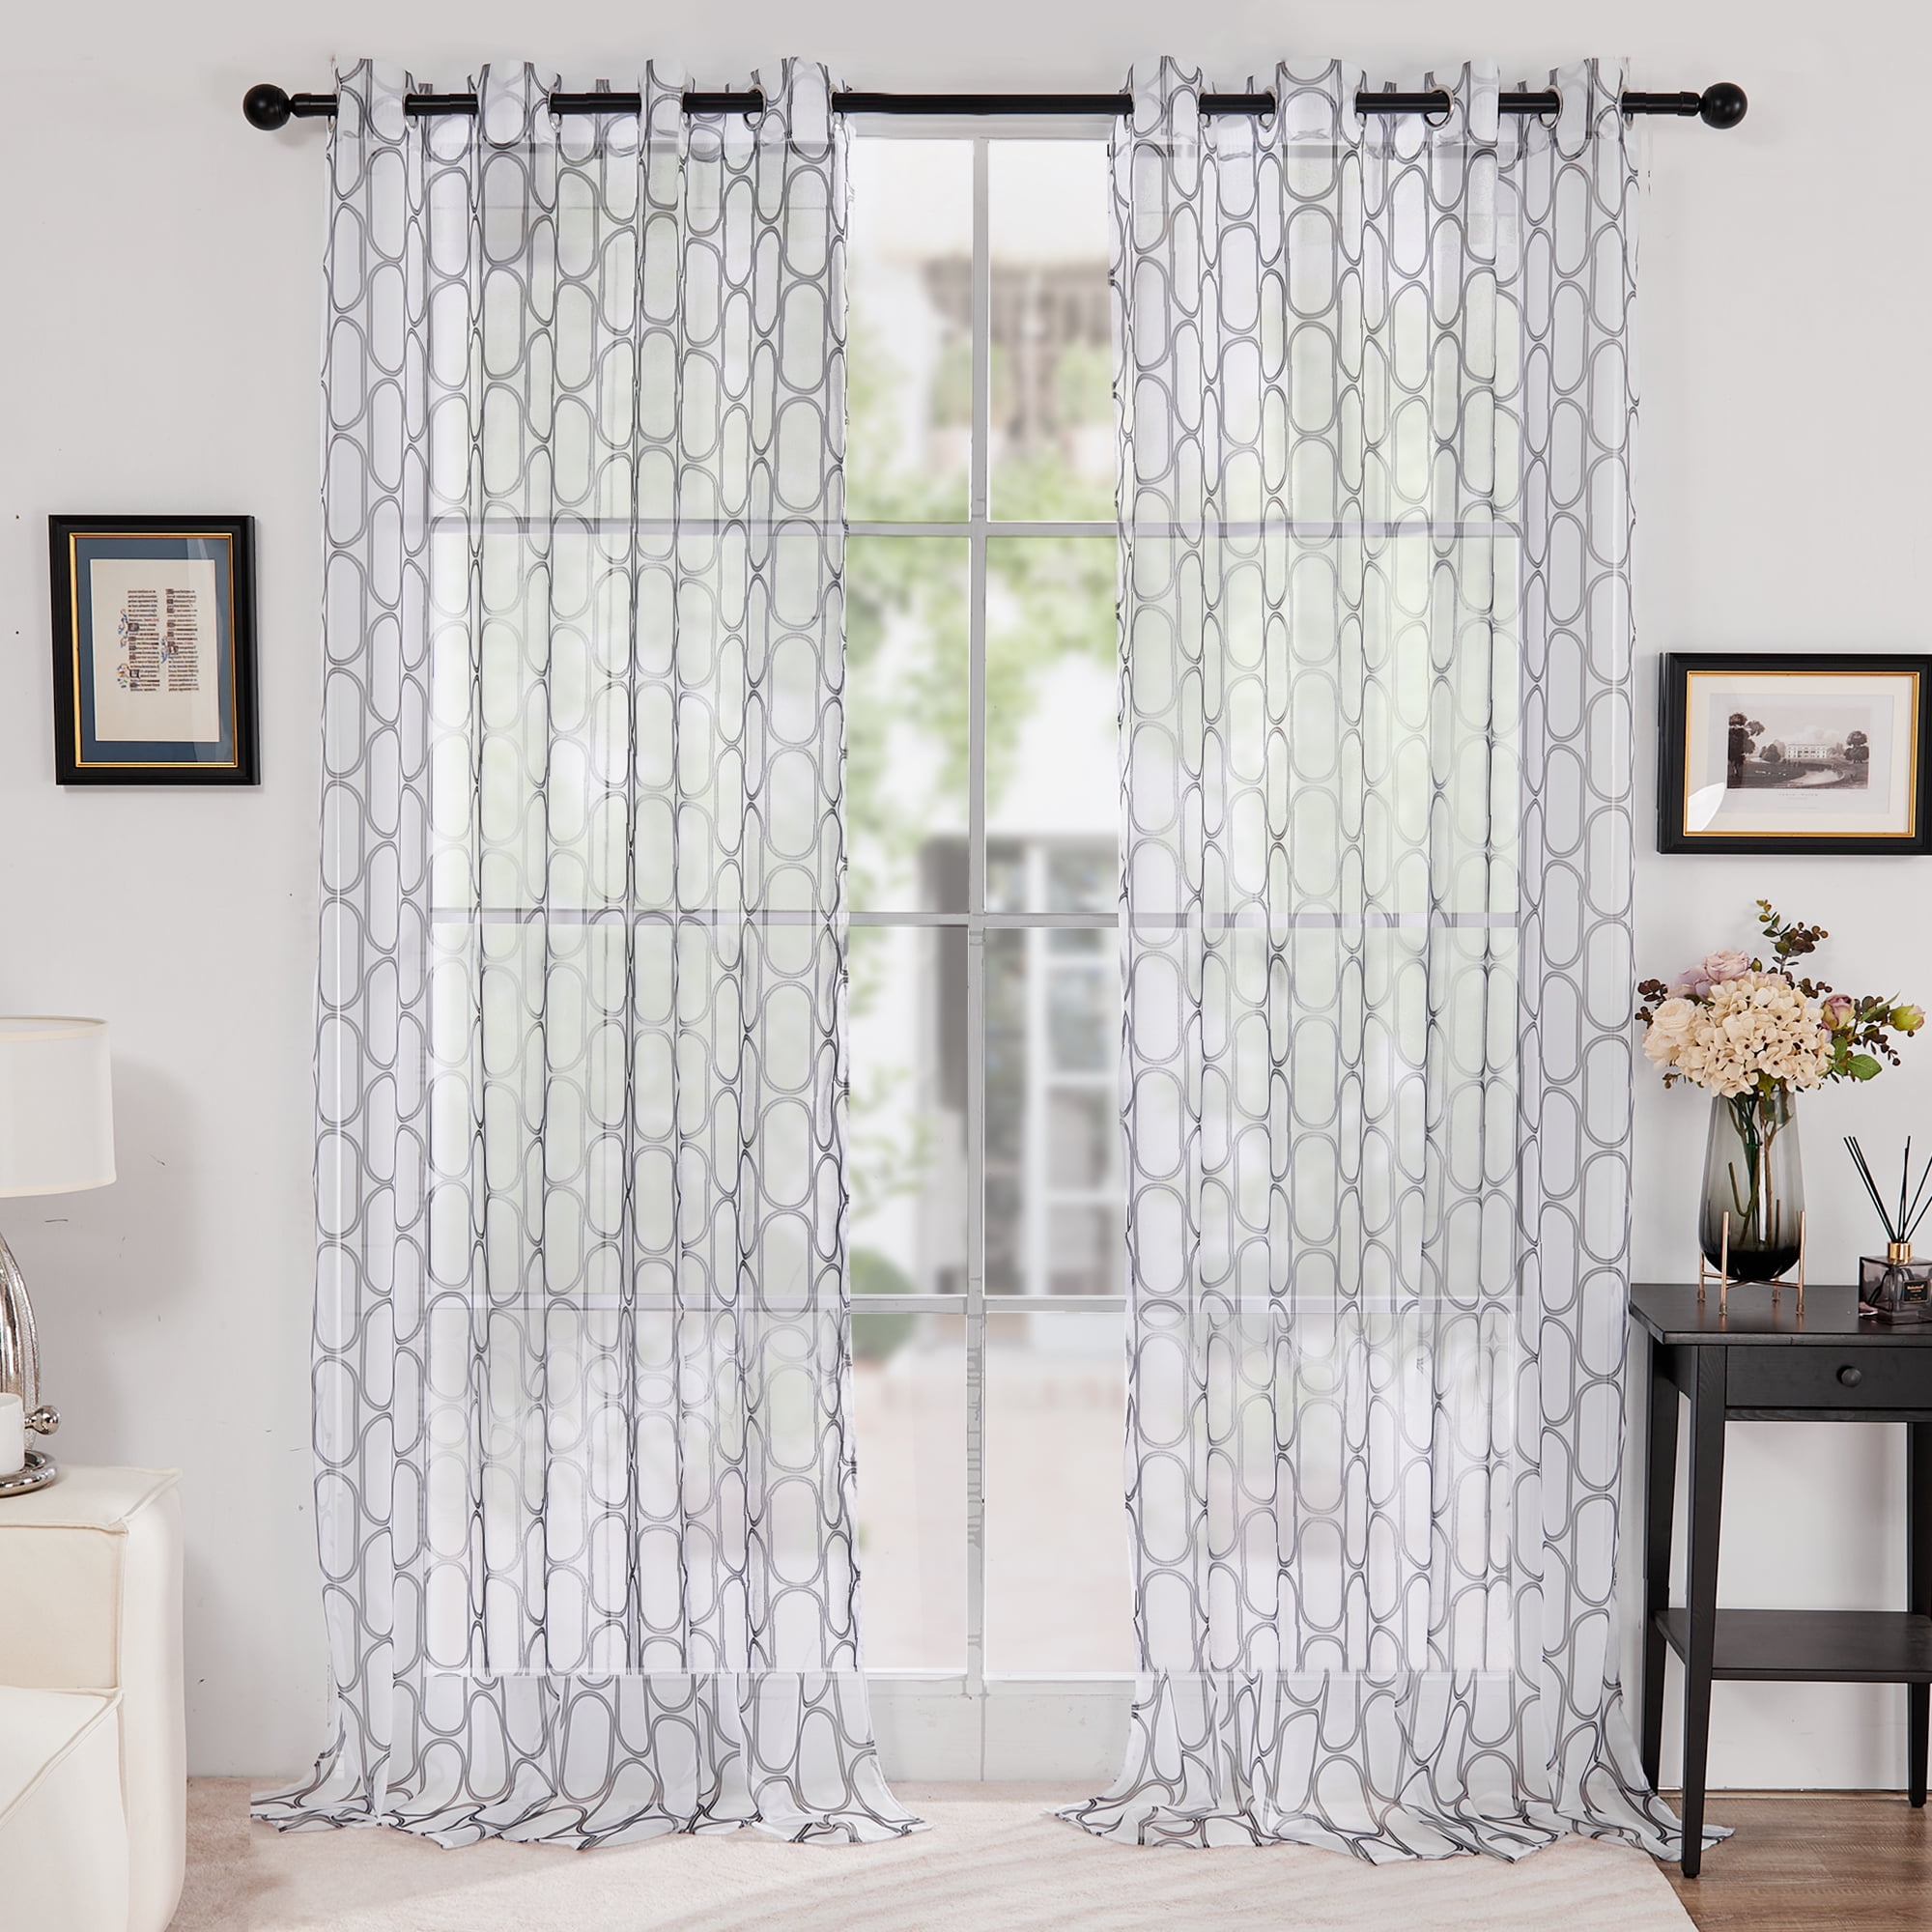 Deconovo White Semi Sheer Curtains with Gray Geometric Pattern, Grommet  Classic Sheer Curtains 52x63 inch, Voile Curtains for Bedroom, 2 Panels 